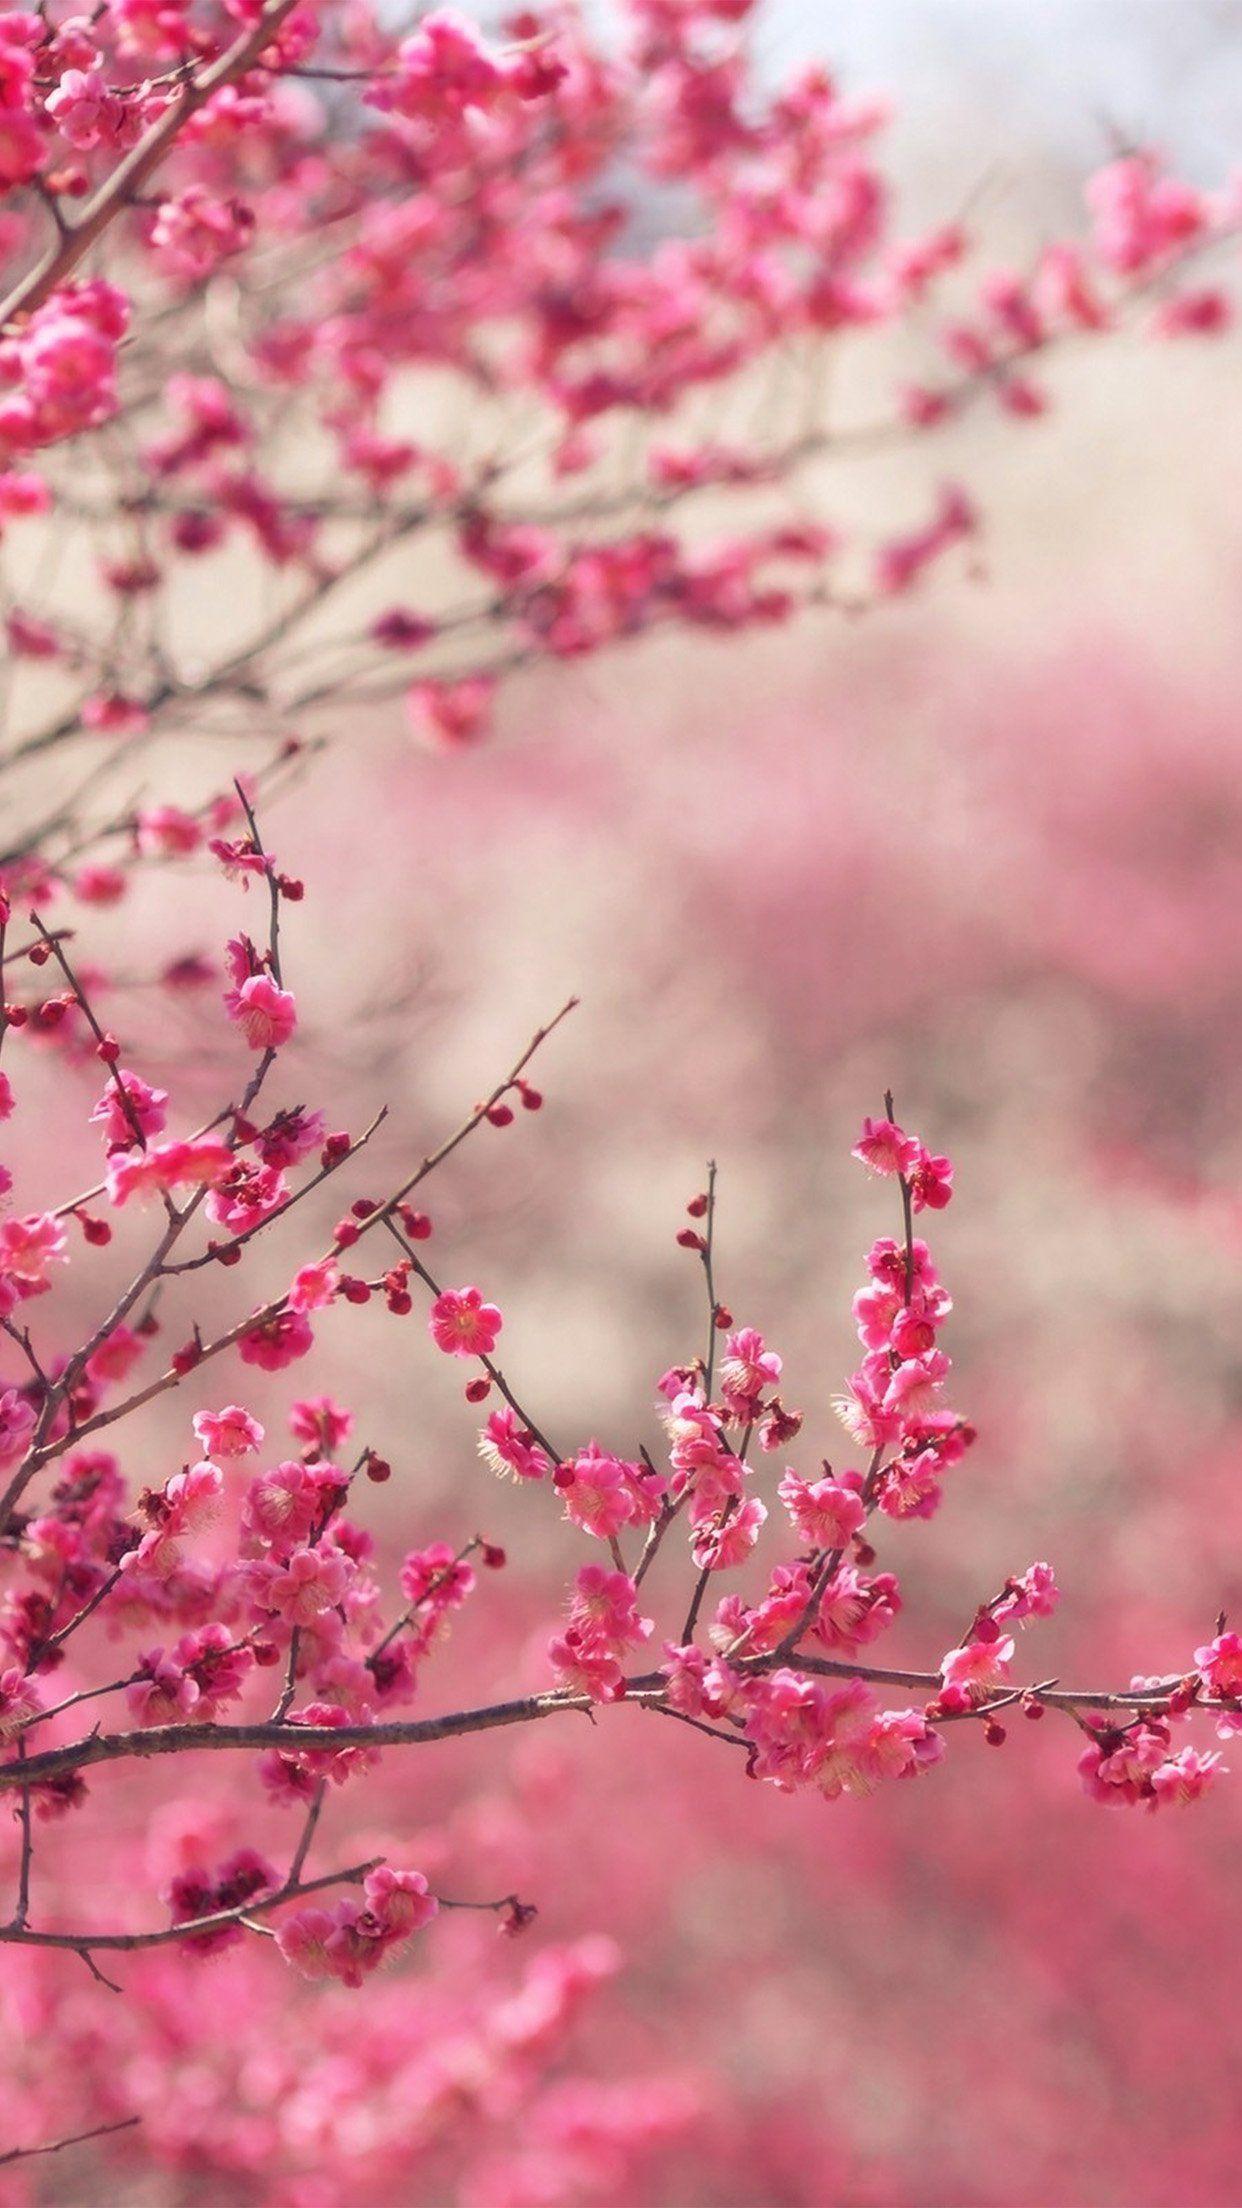 iPhone 8 wallpaper. pink blossom nature